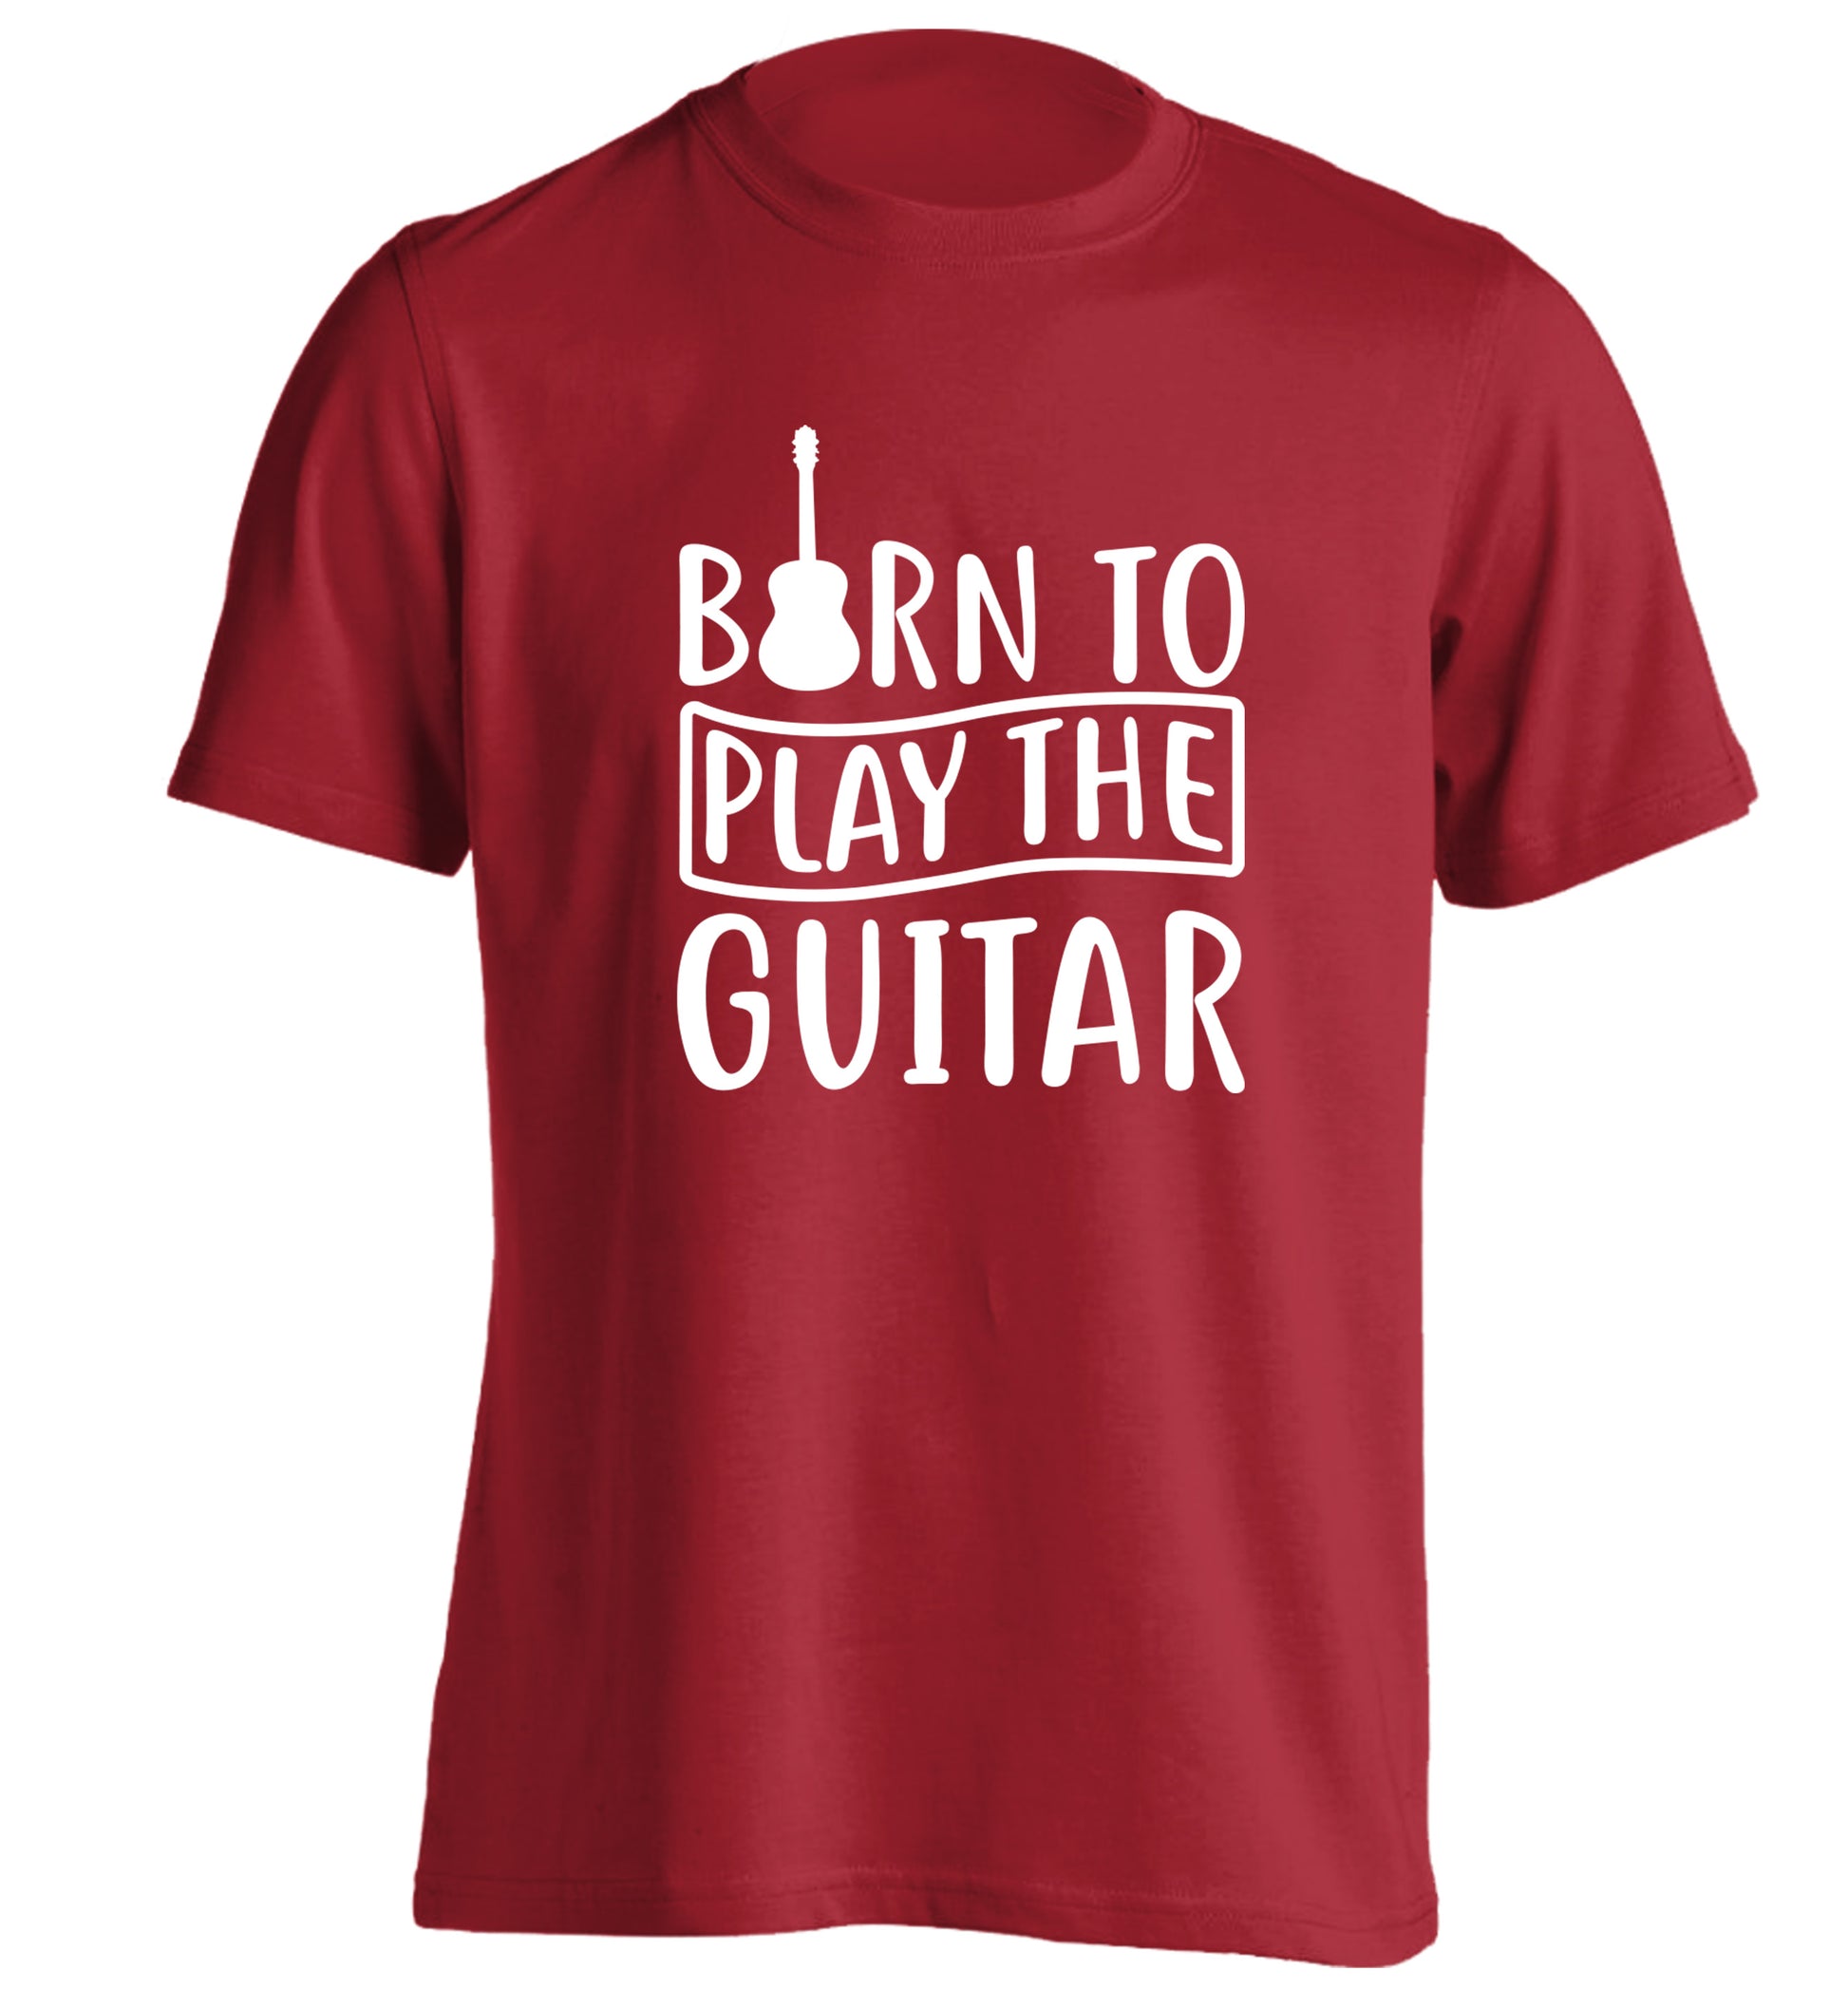 Born to play the guitar adults unisex red Tshirt 2XL